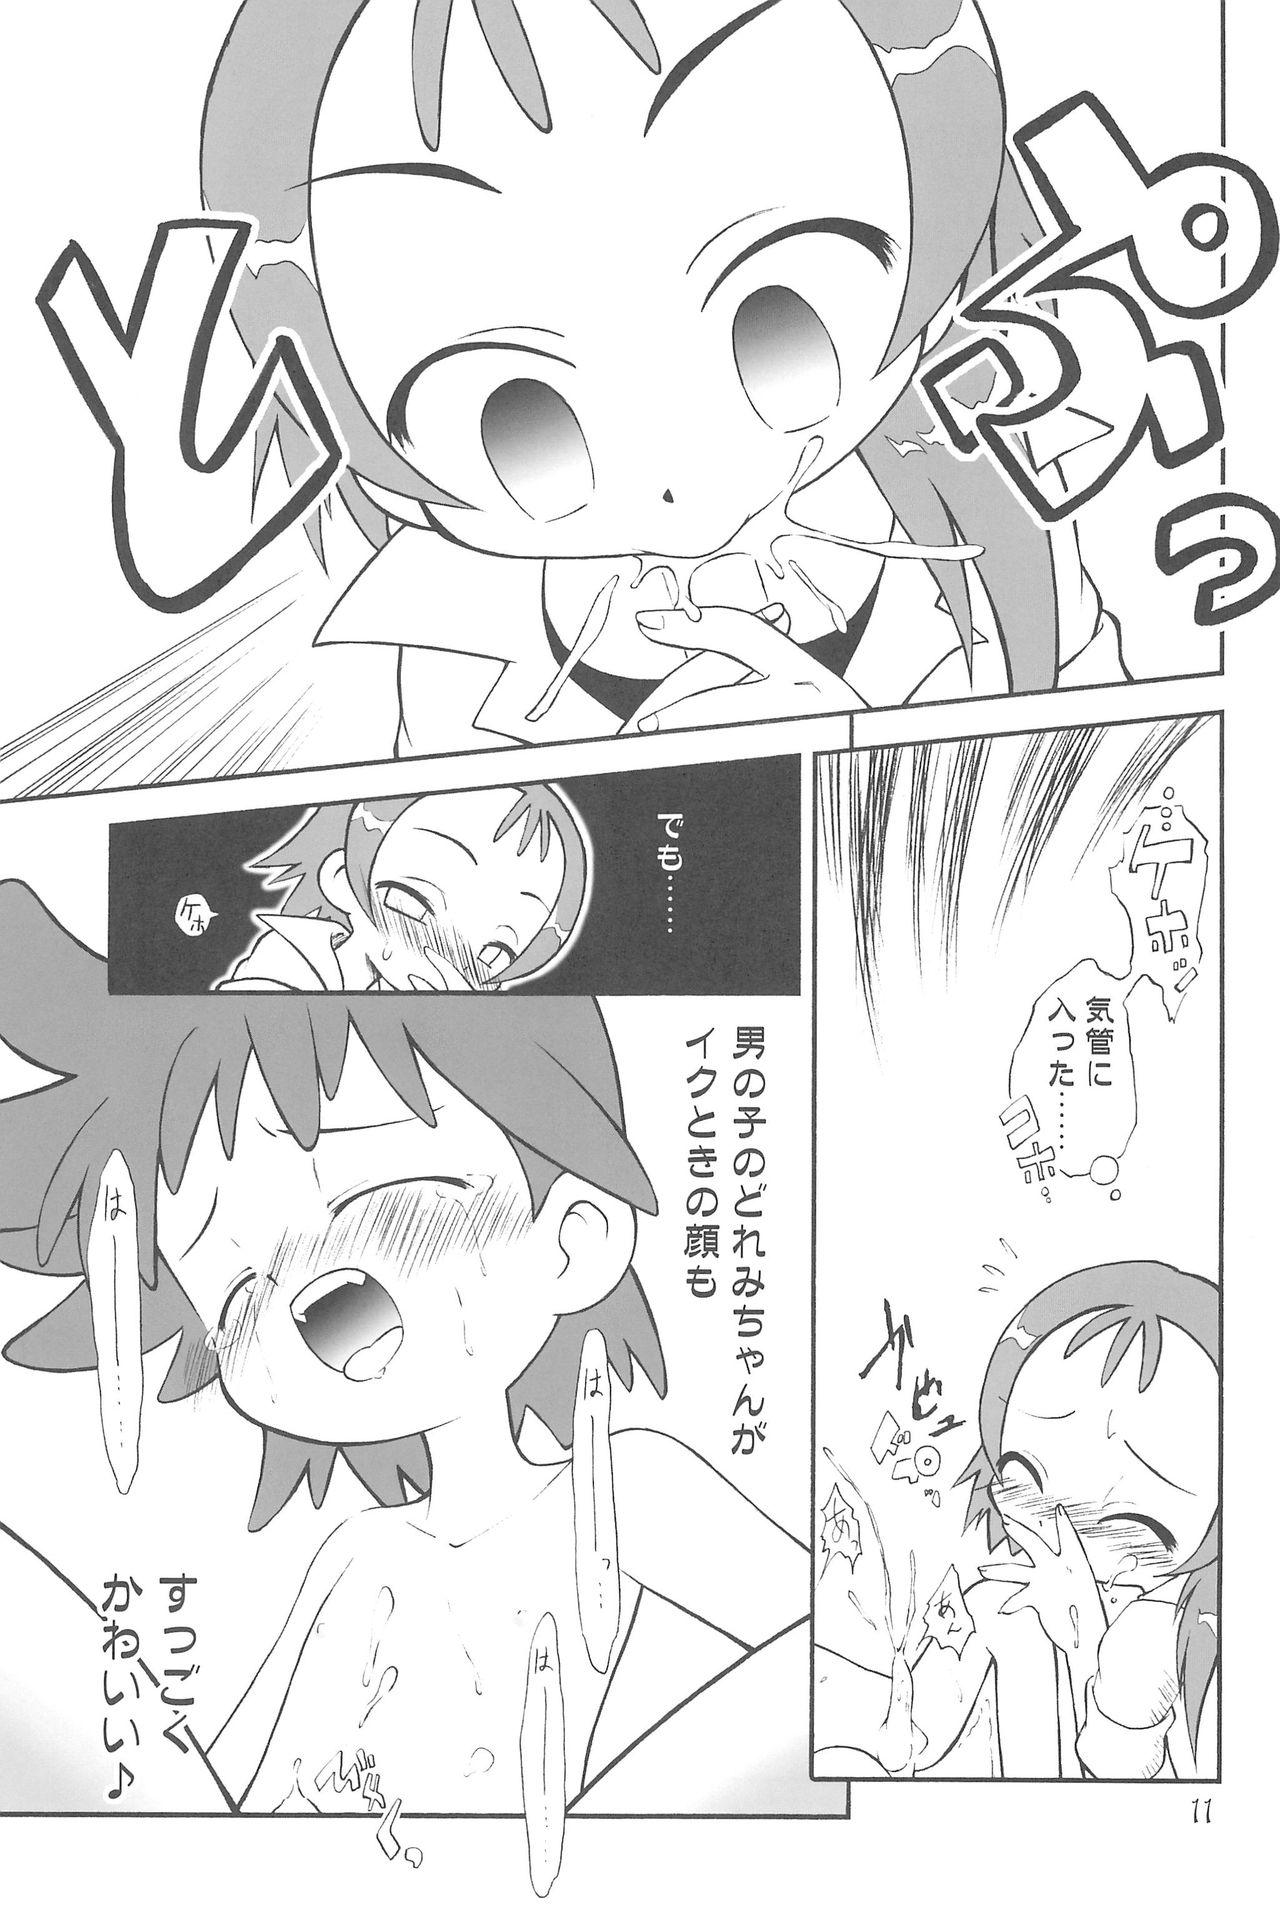 Pornstar Witch’s Song Plus - Ojamajo doremi High - Page 11